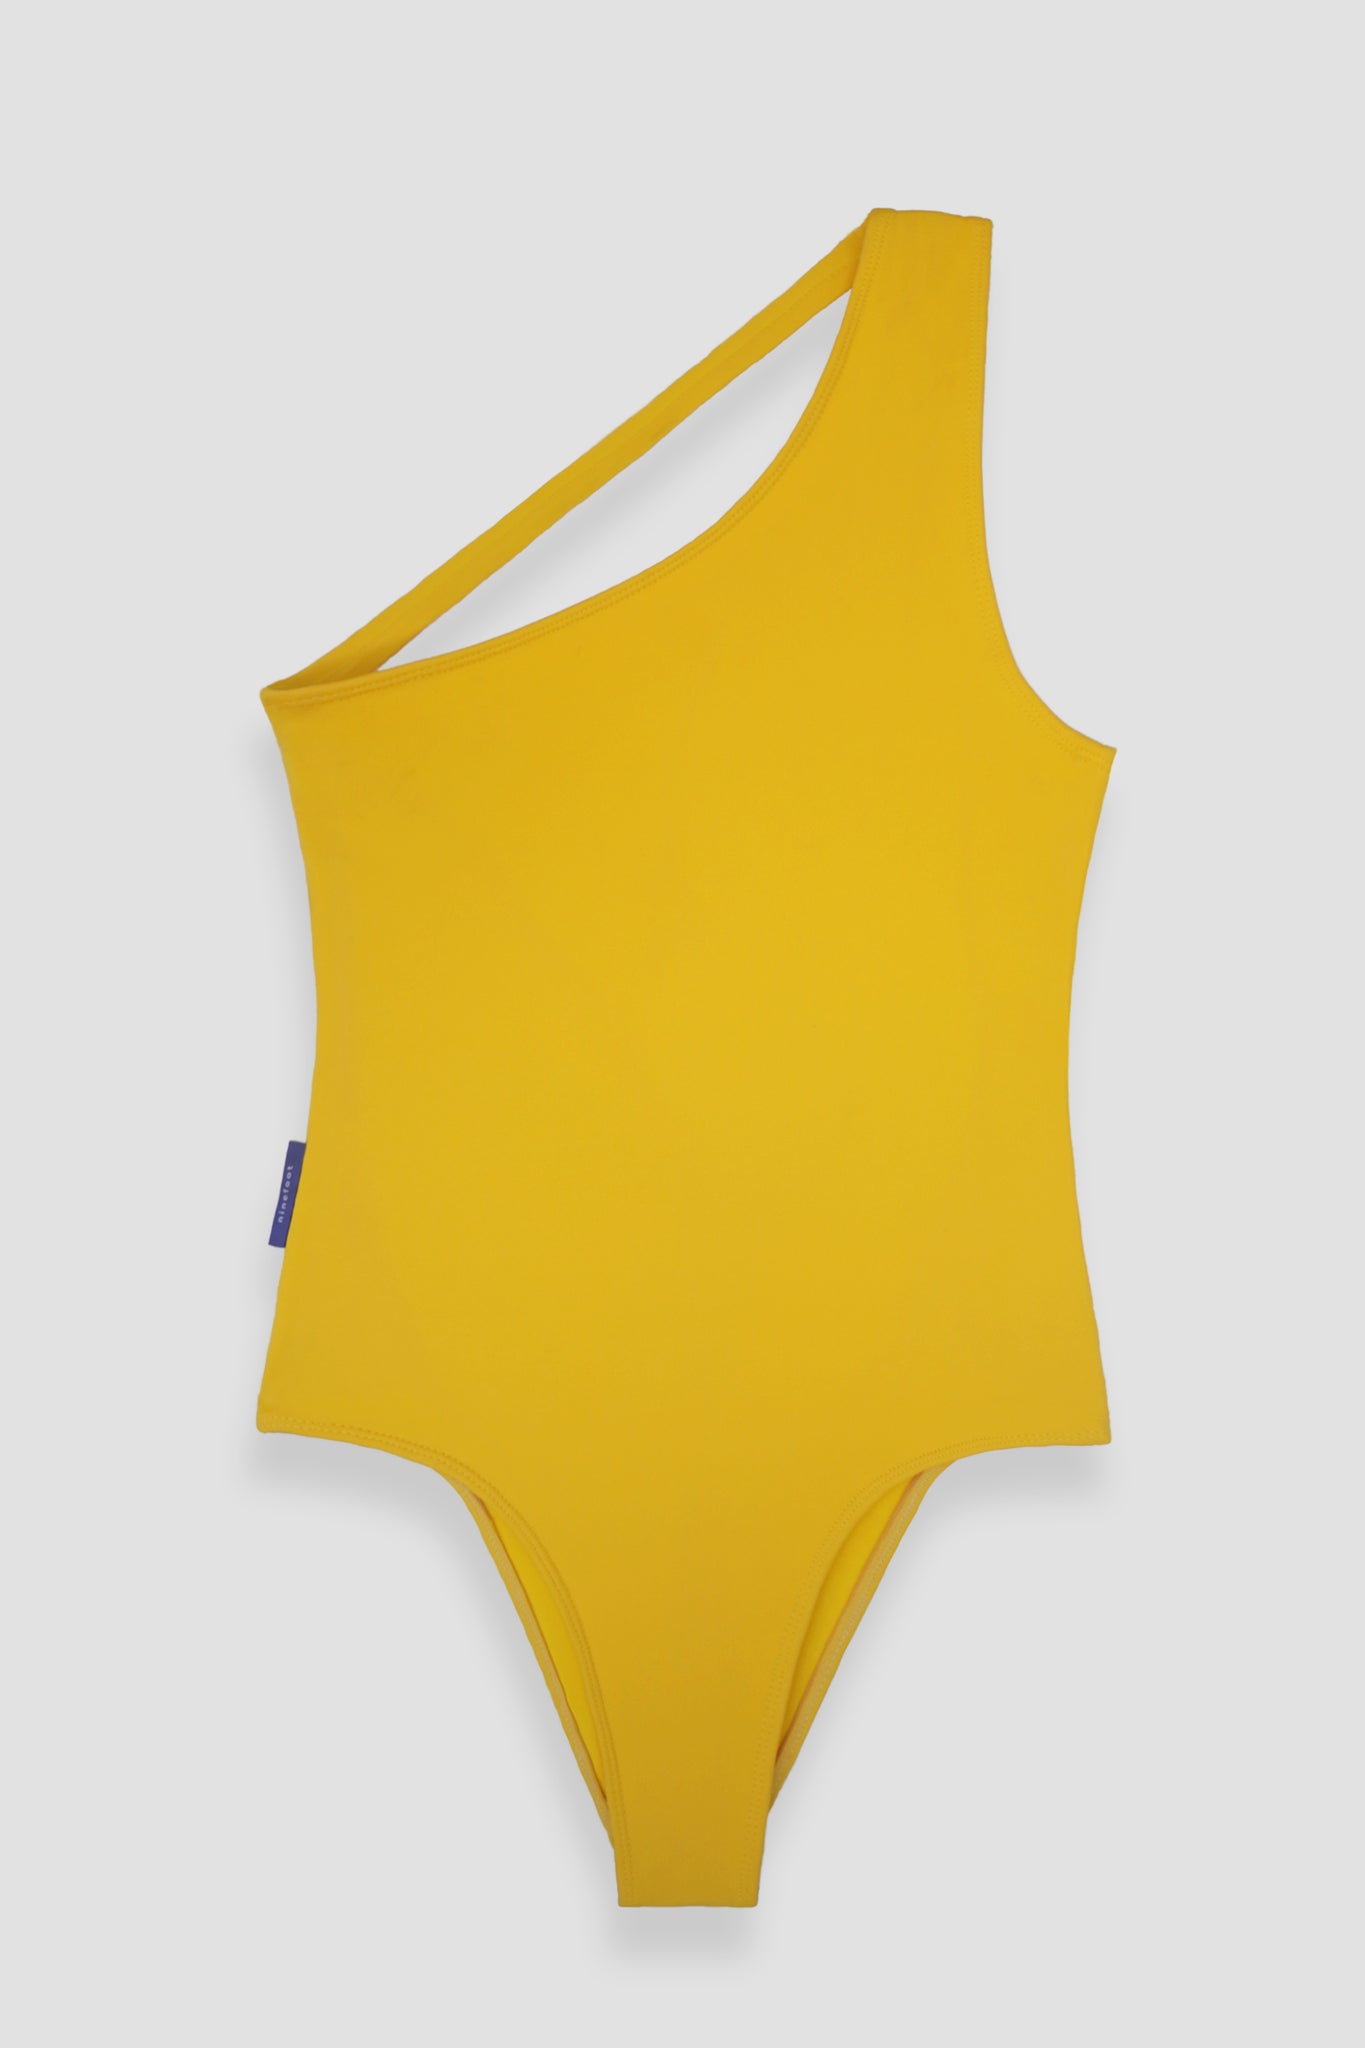 Ninefoot Studio Mawi One Shoulder Surf Swimsuit in Yellow Illusion | One piece